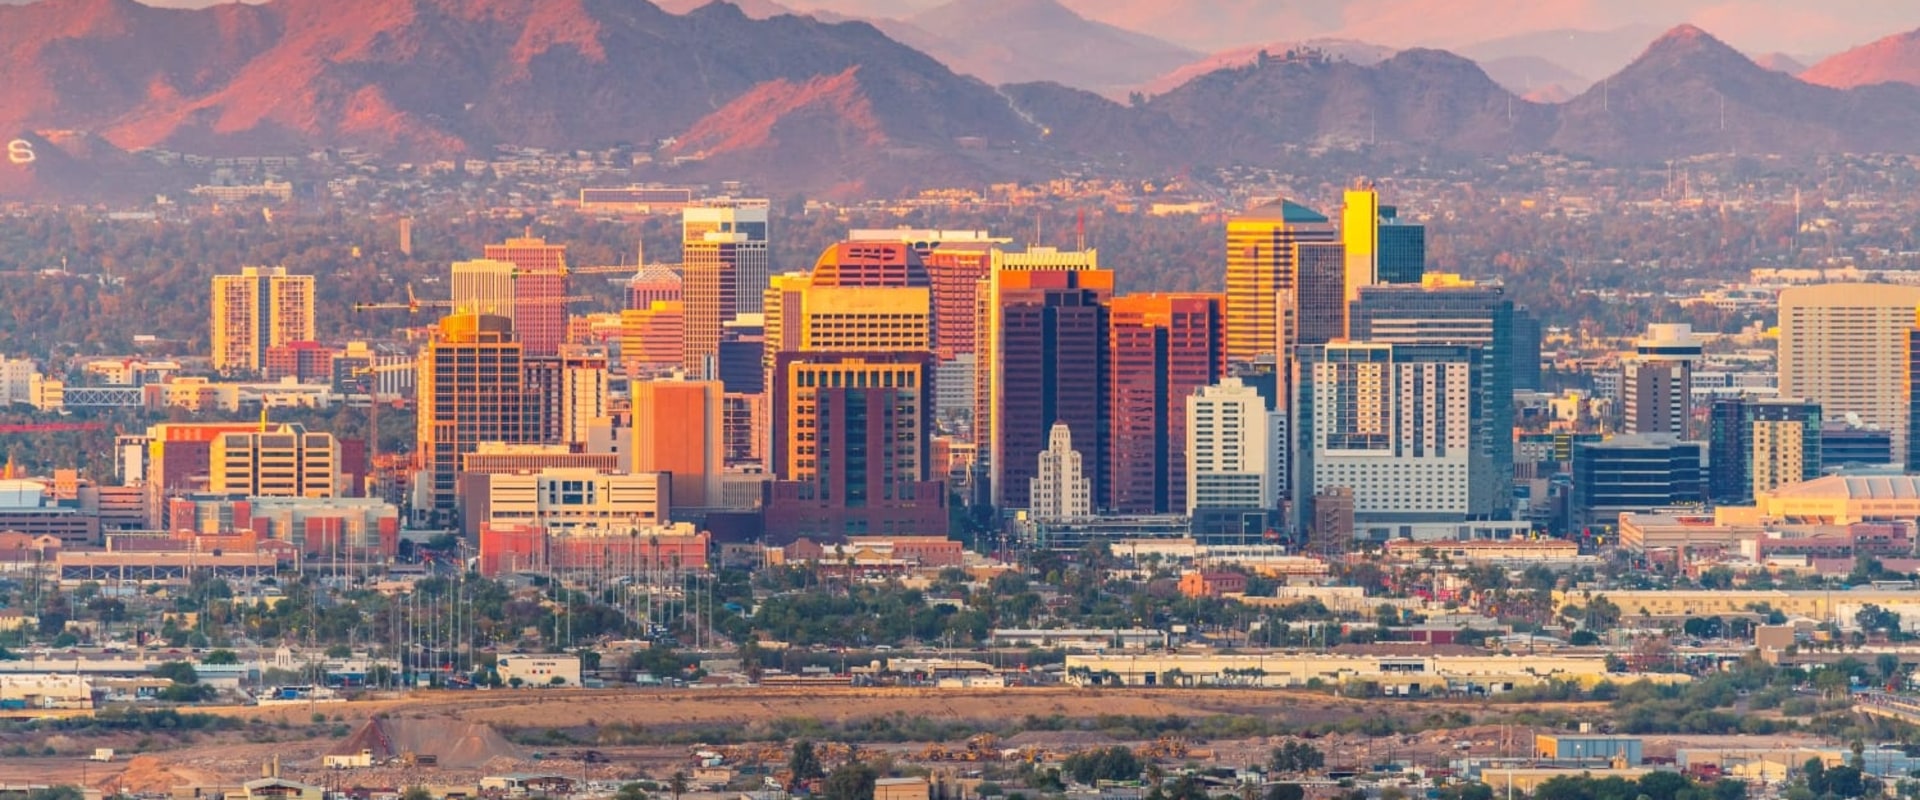 Is phoenix and scottsdale the same city?